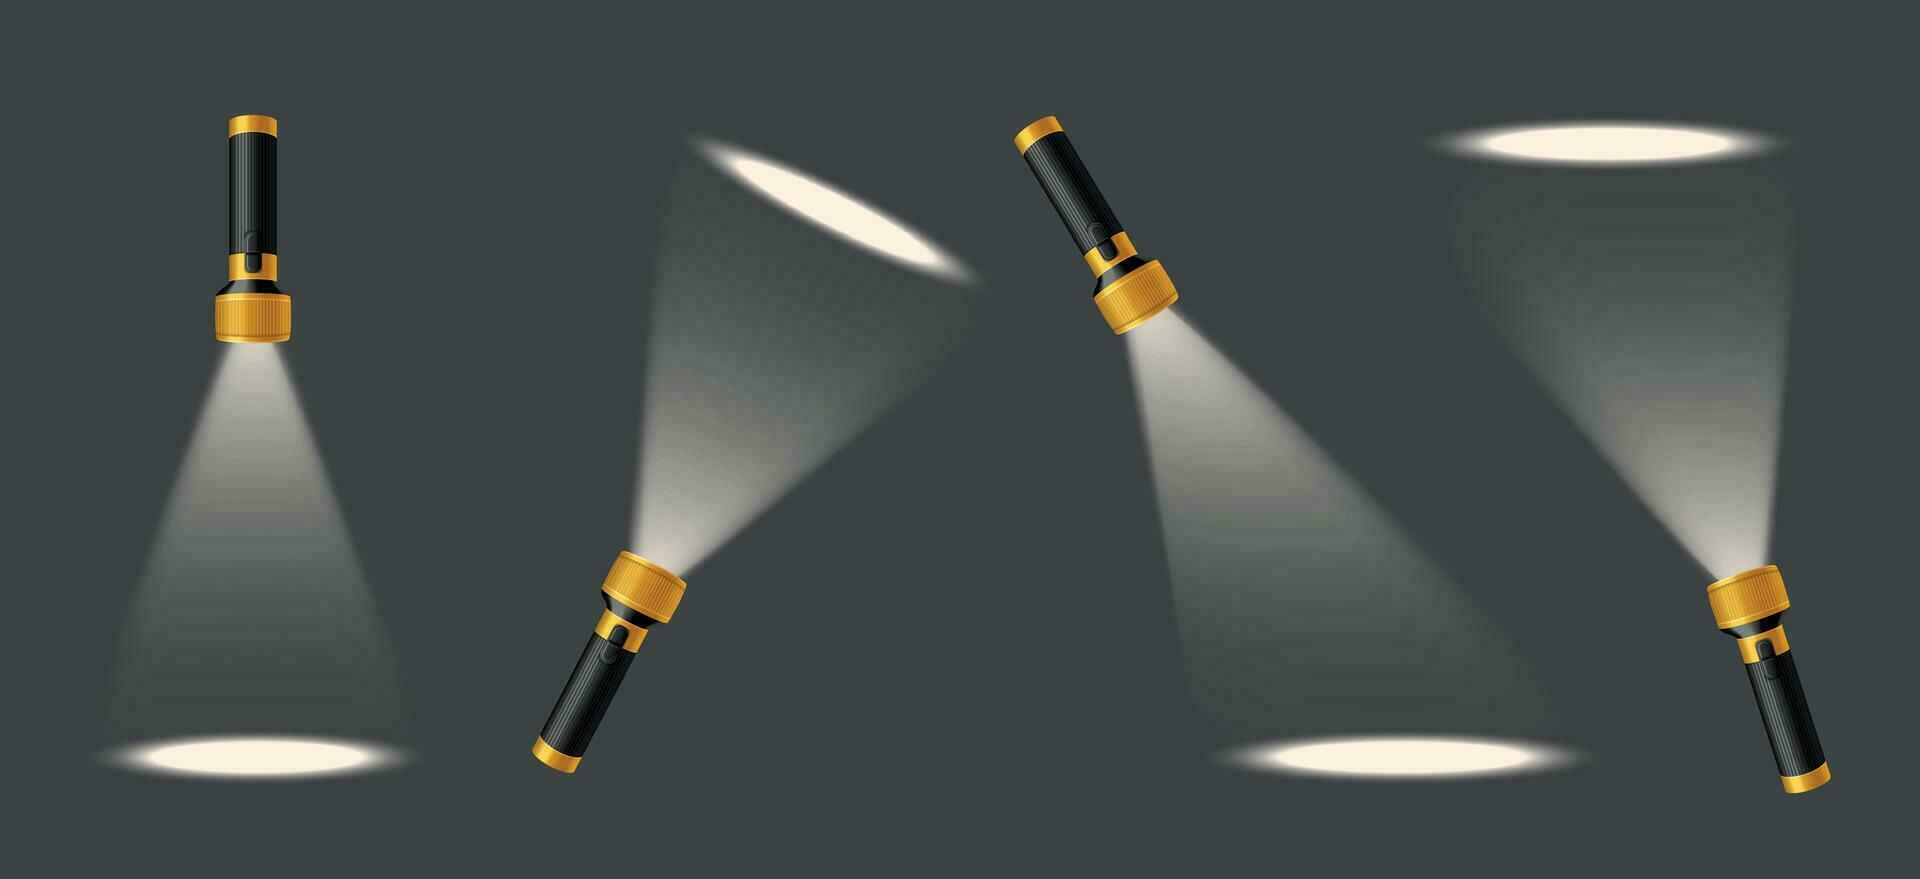 Flashlights With Light Spots Realistic Set vector